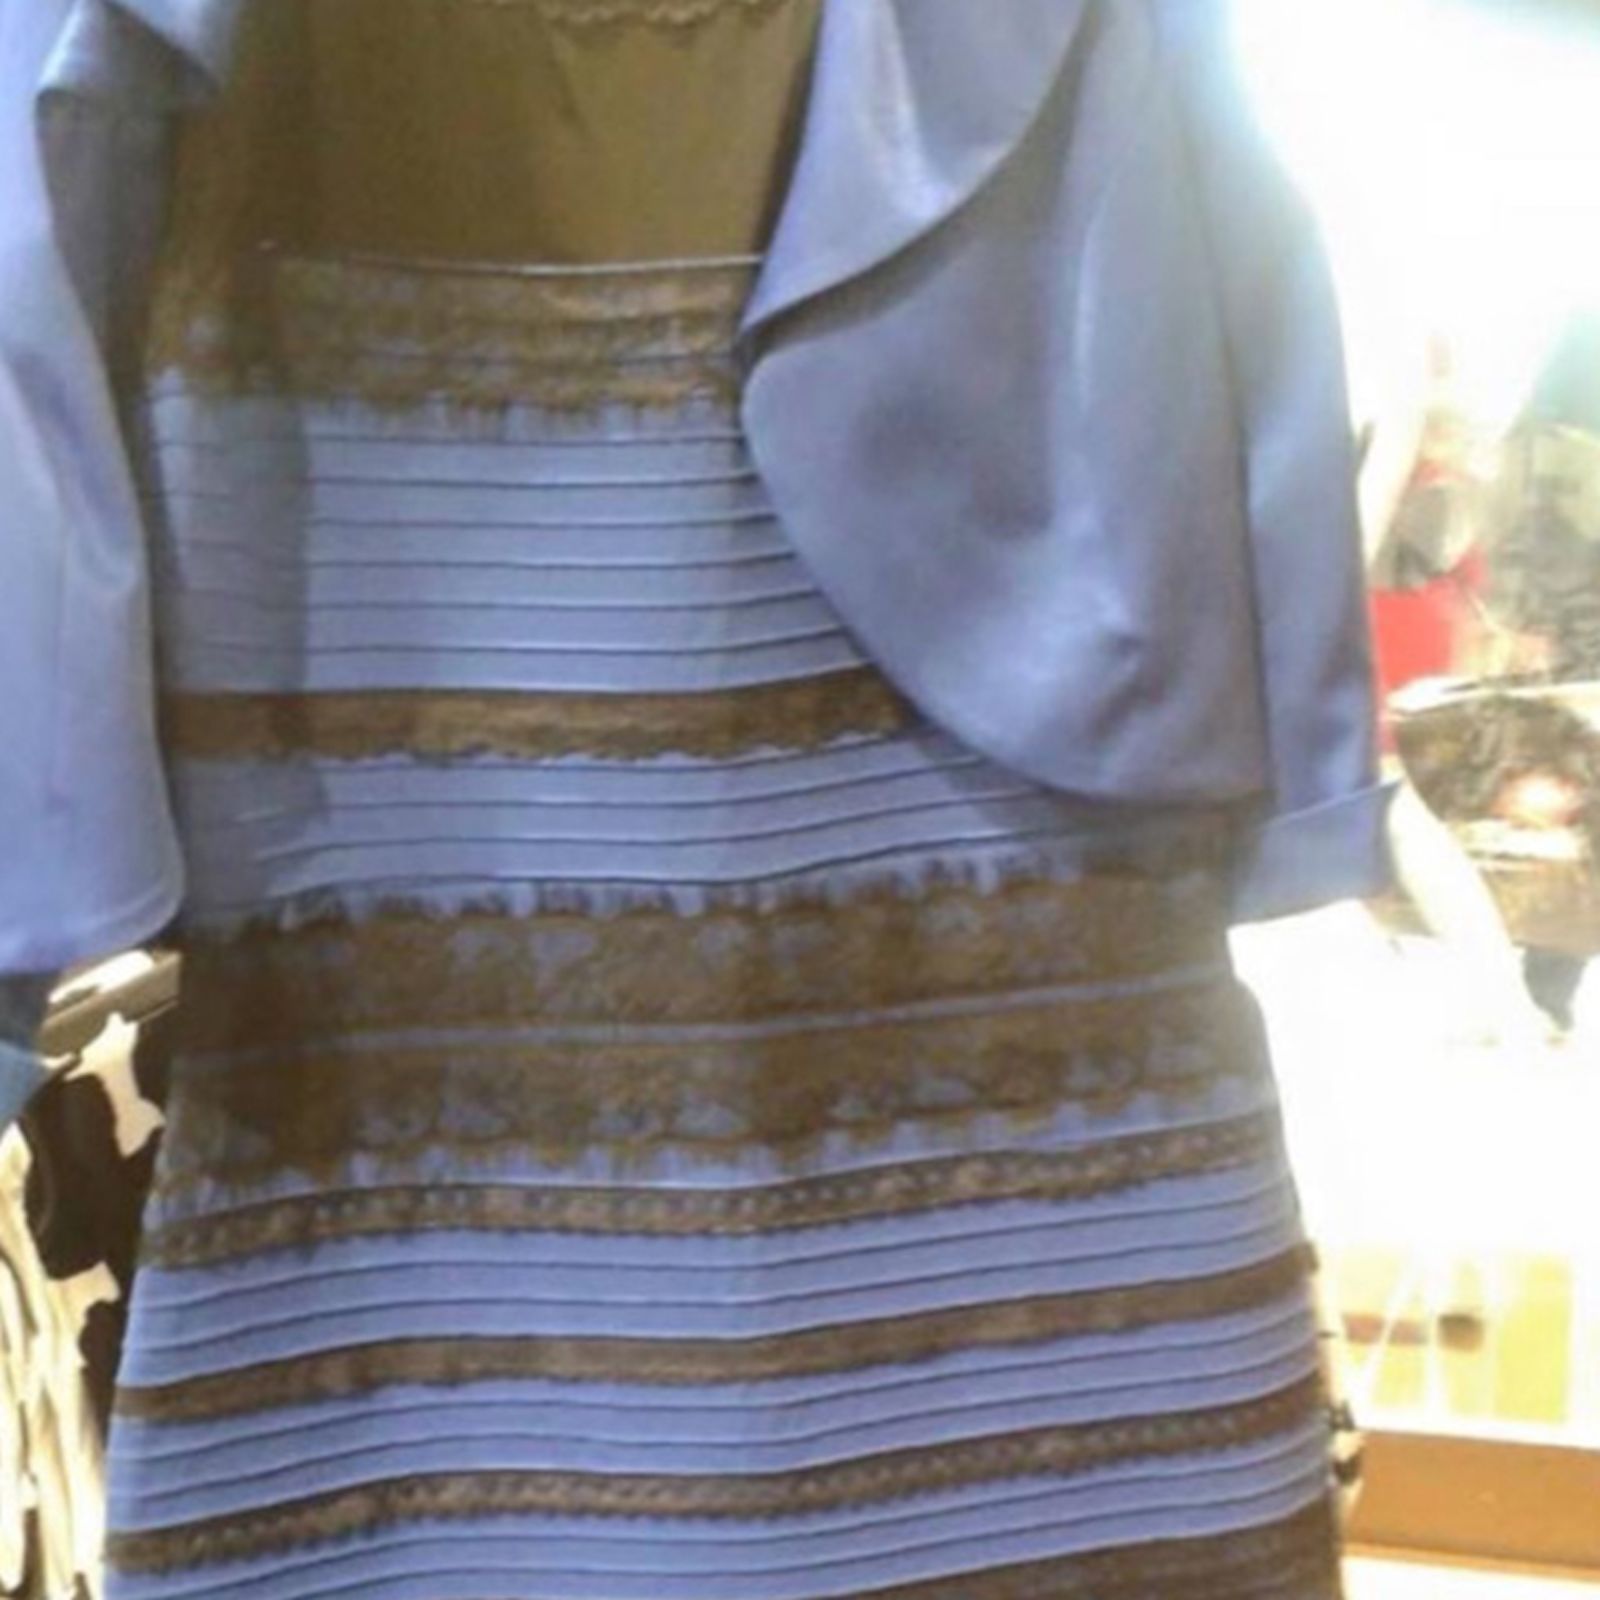 What color is this dress? CNN